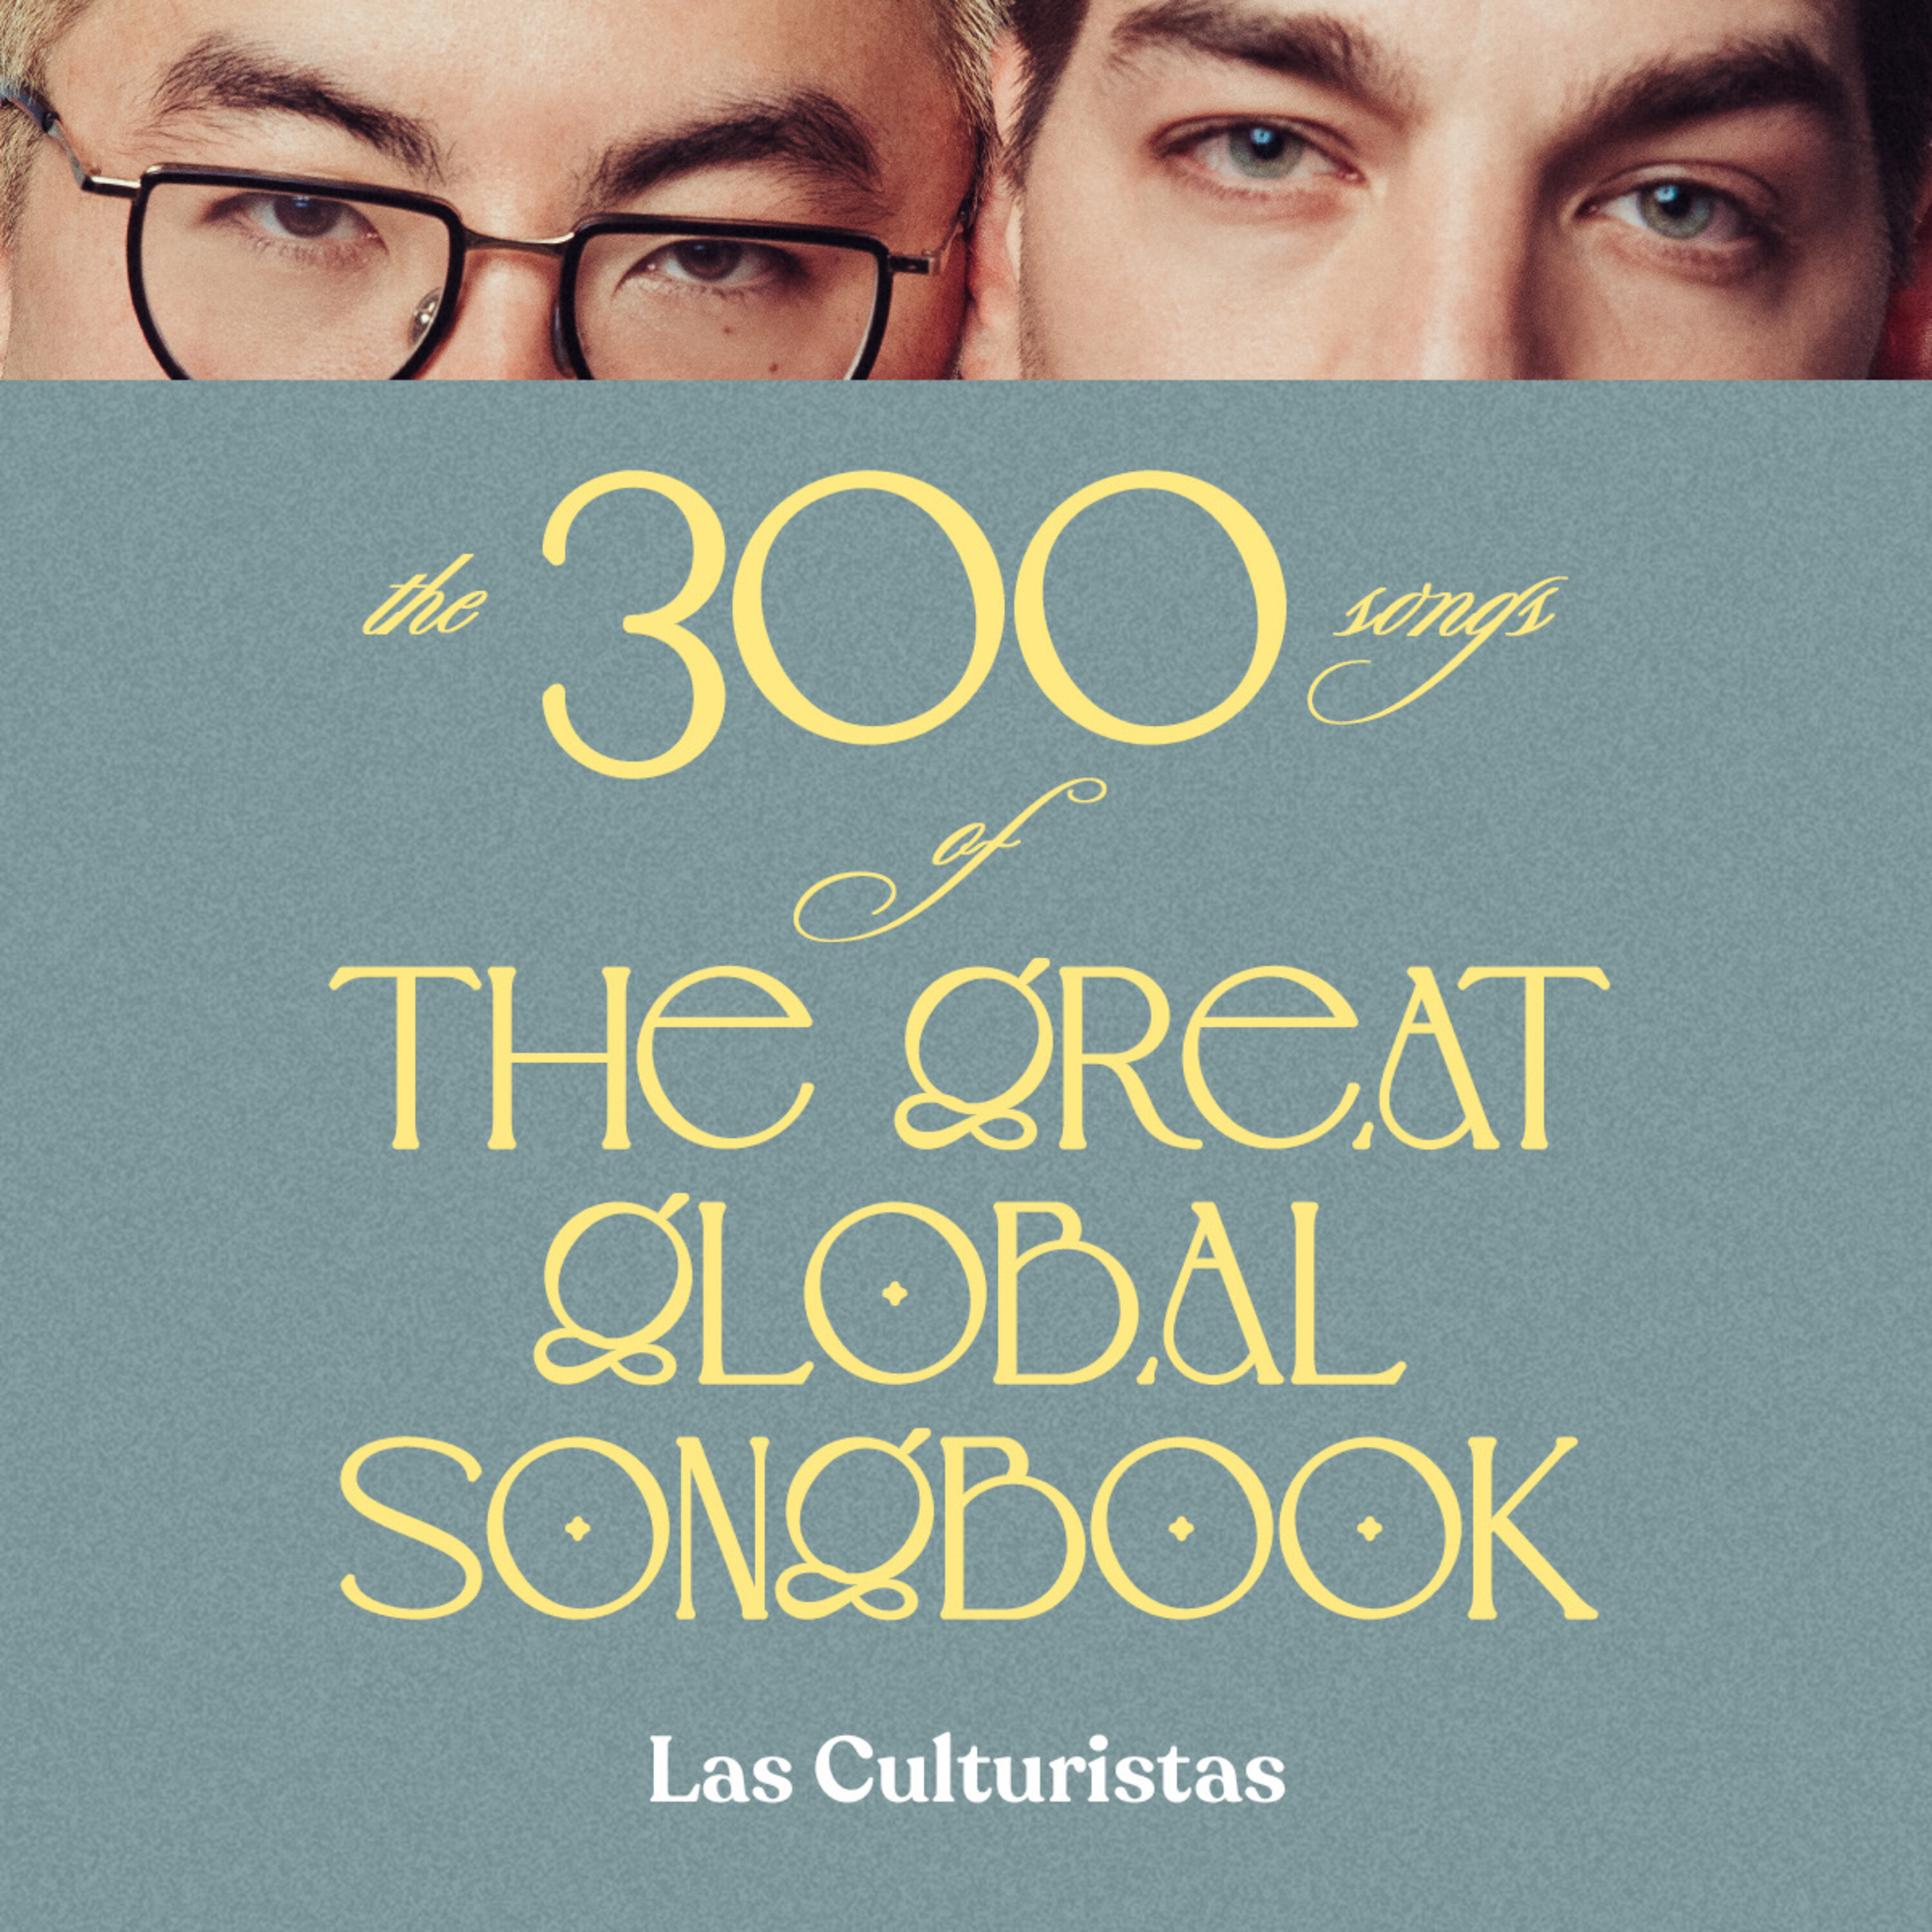 The 300 Songs Of The Great Global Songbook Part I